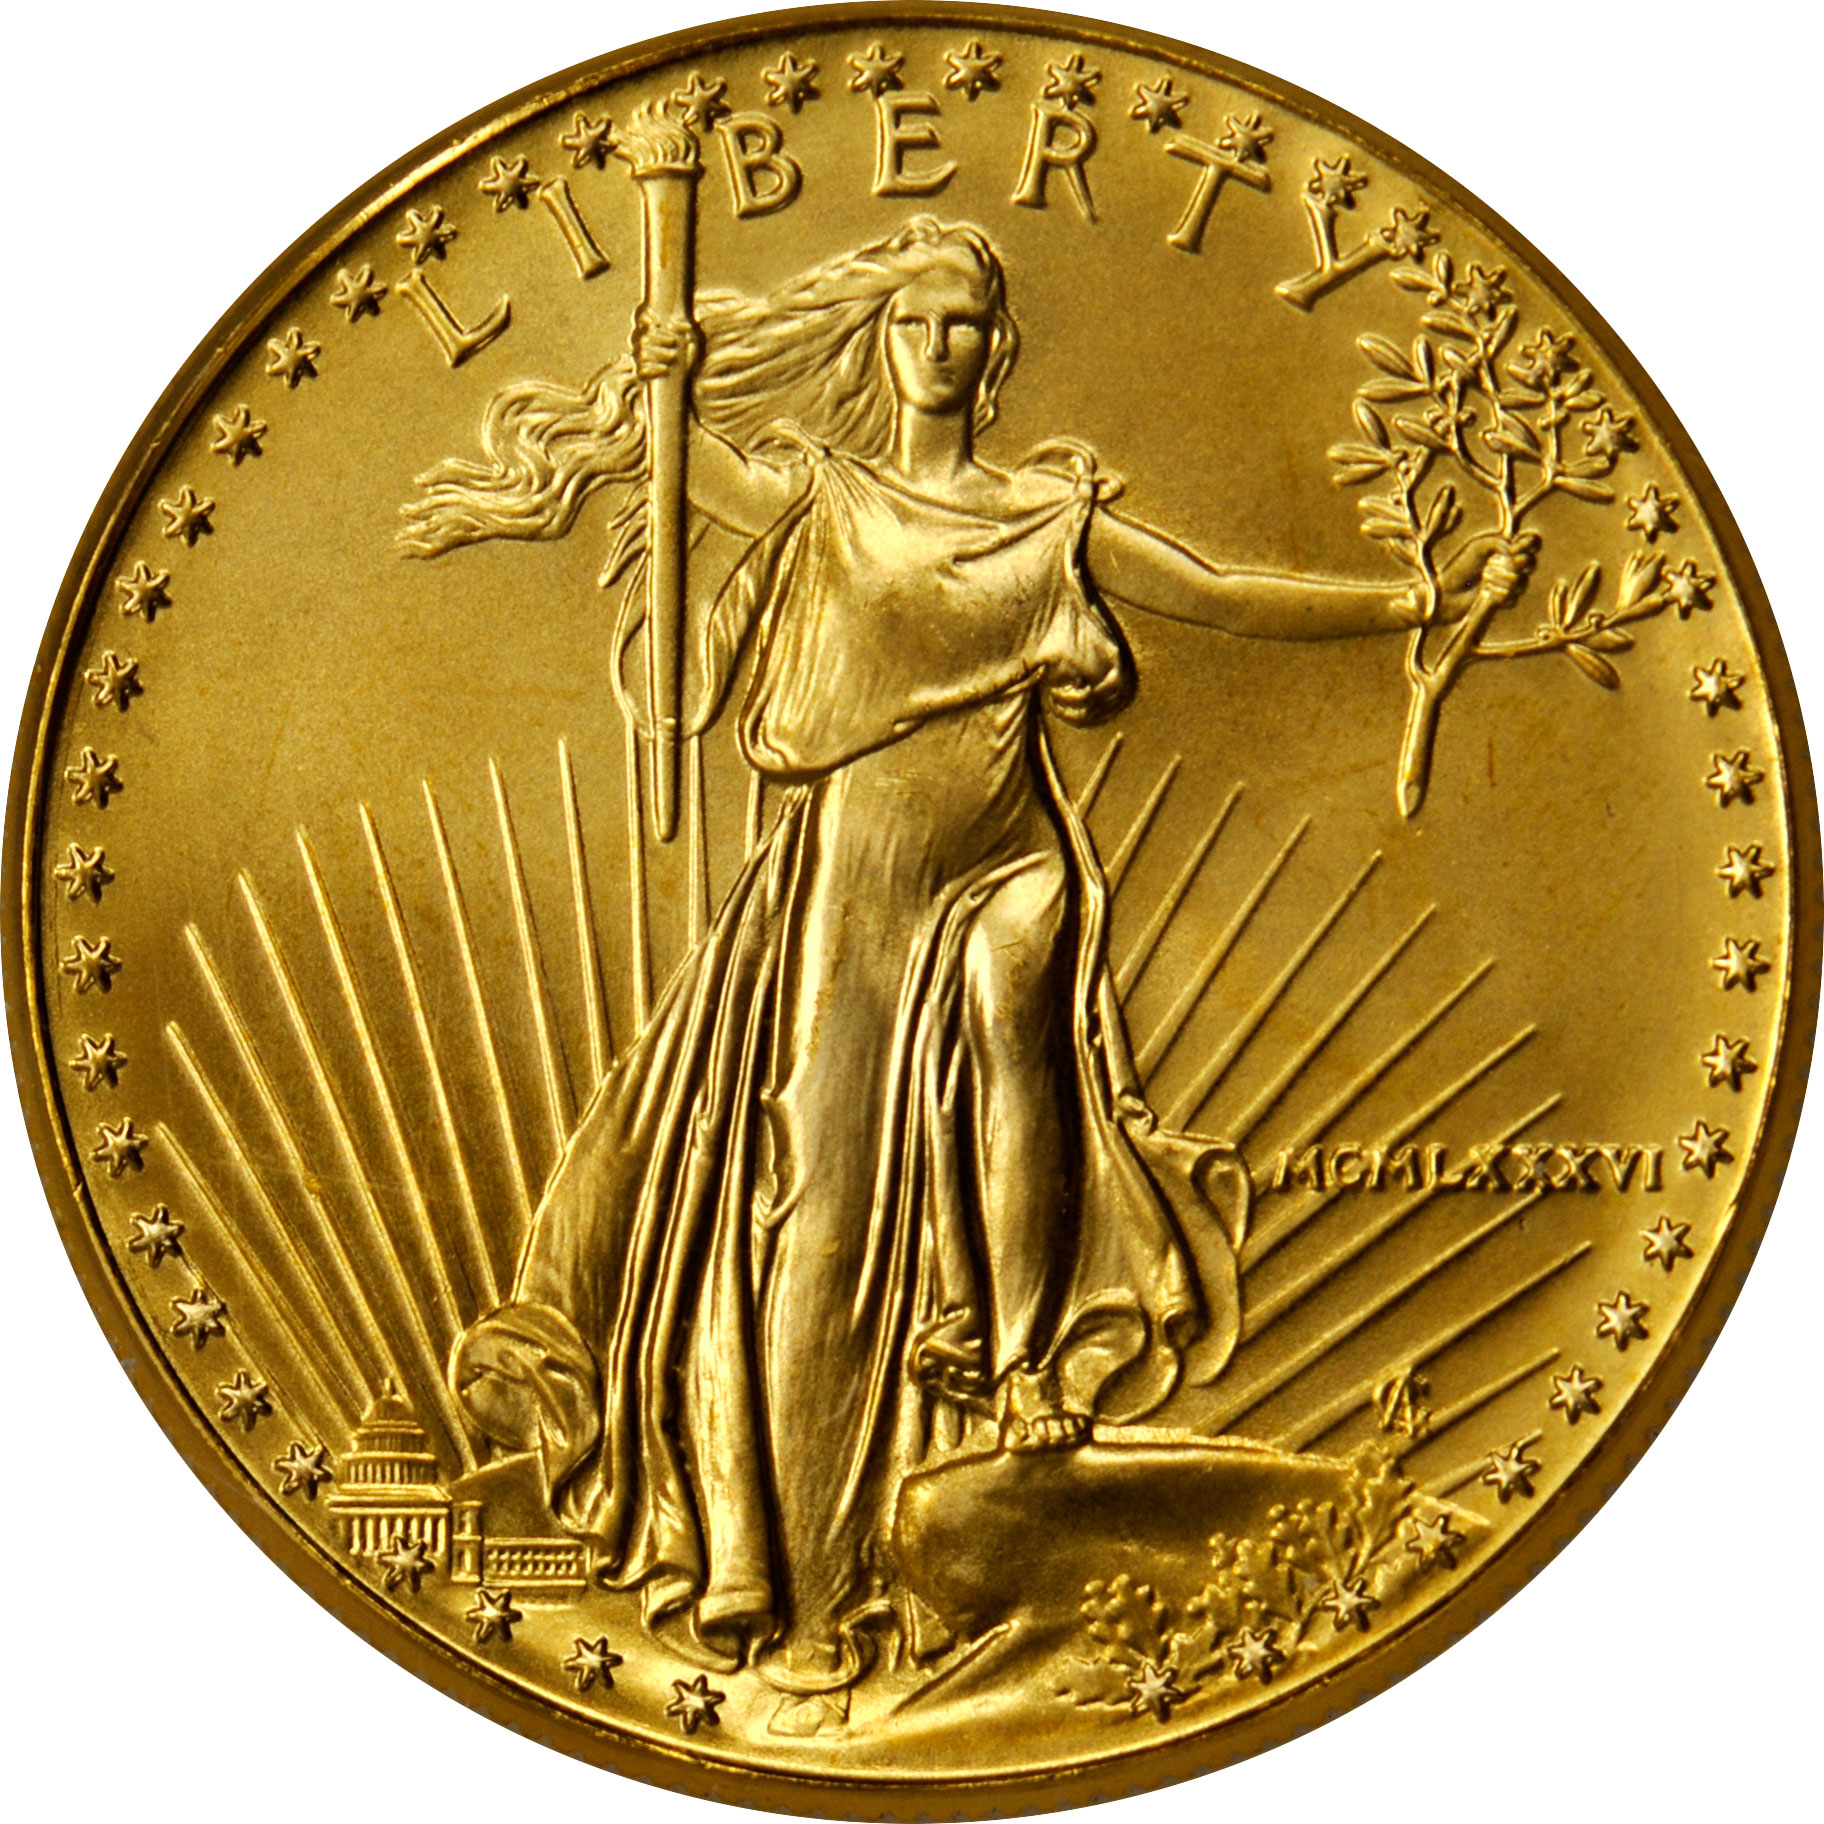 How to Find the Value of Your Gold Coins